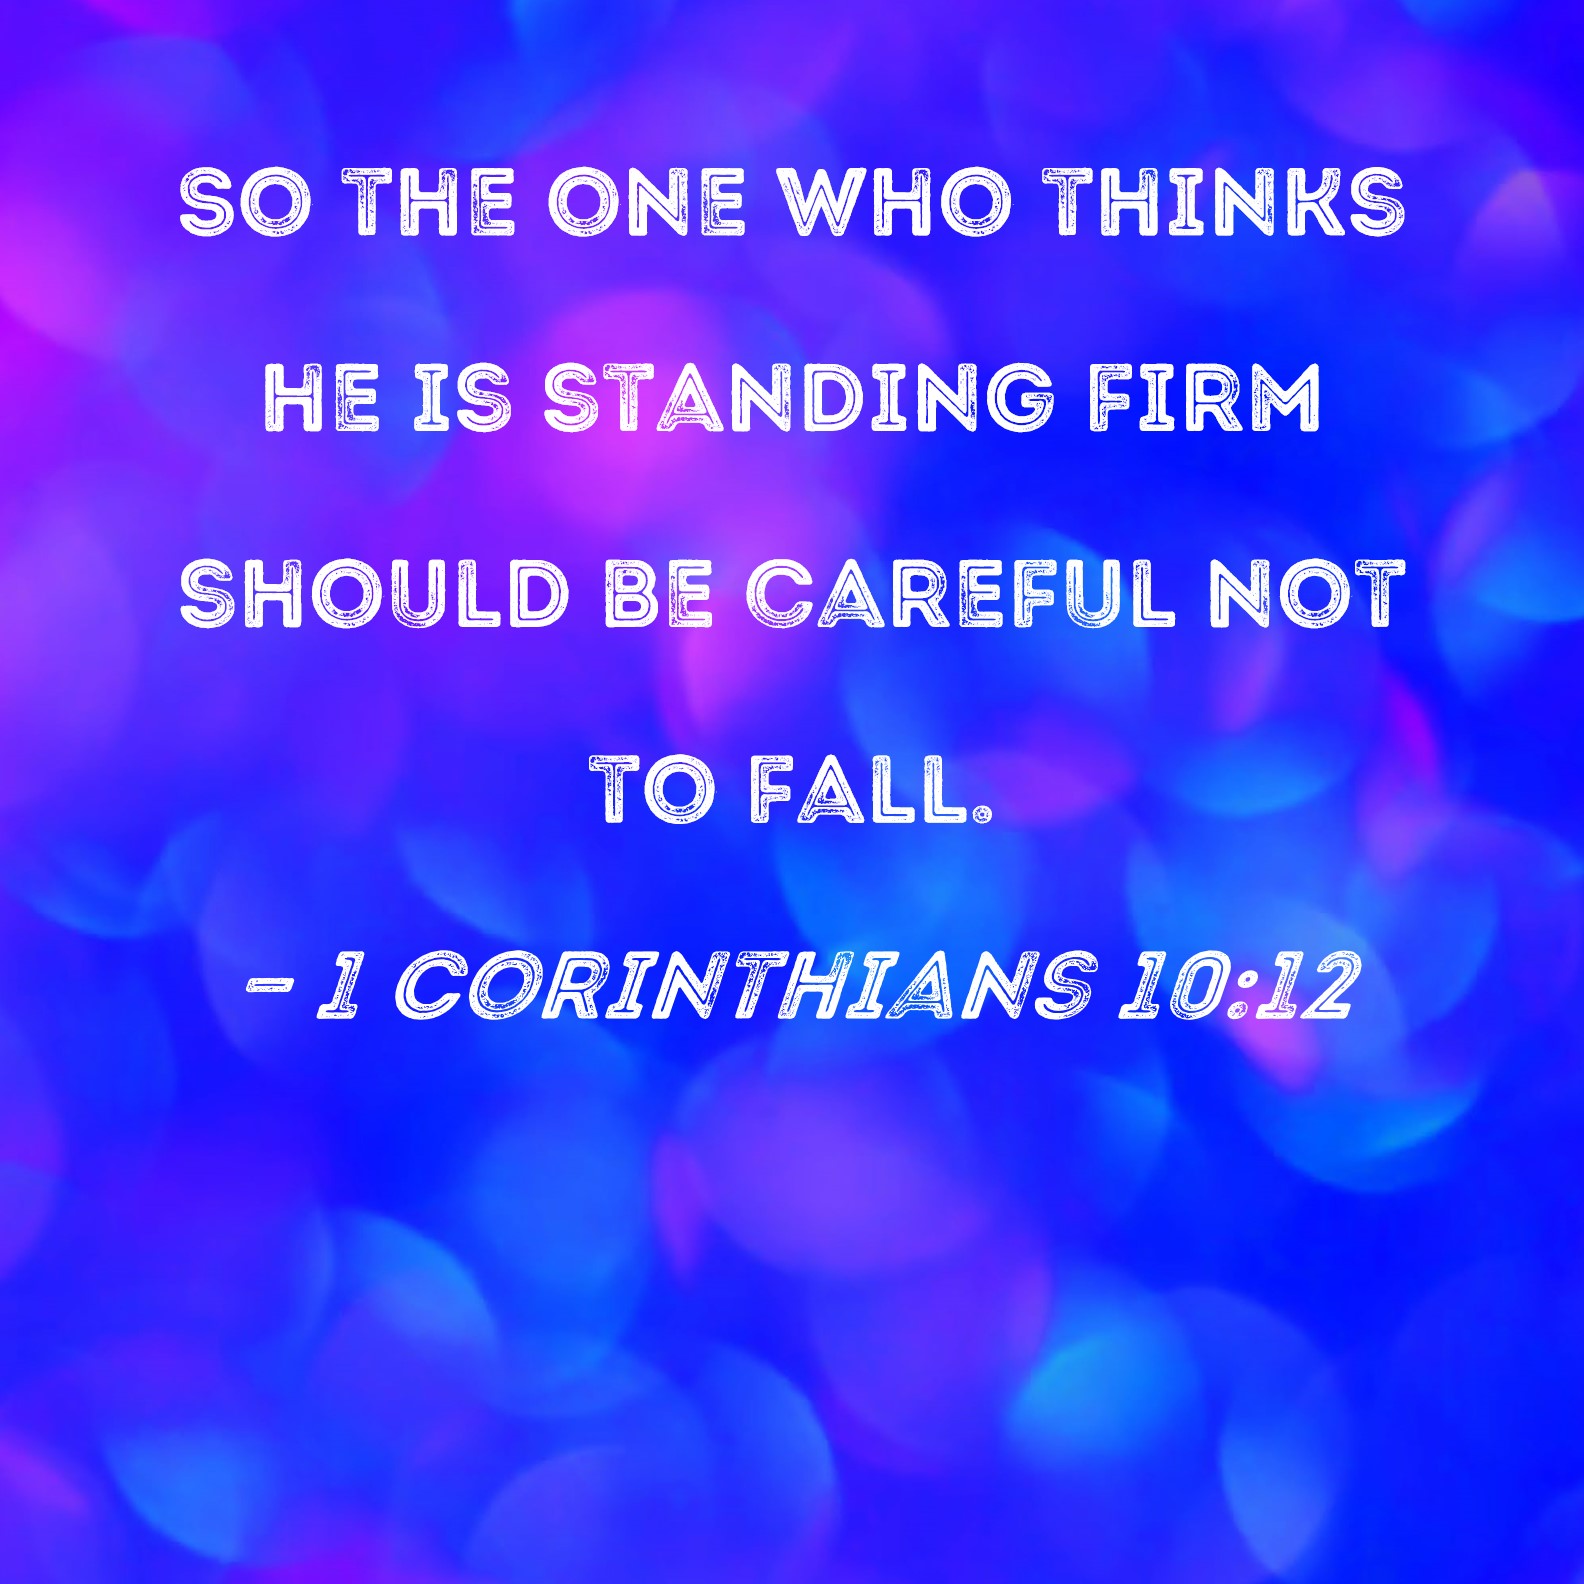 1 Corinthians 10:12 So the one who thinks he is standing firm